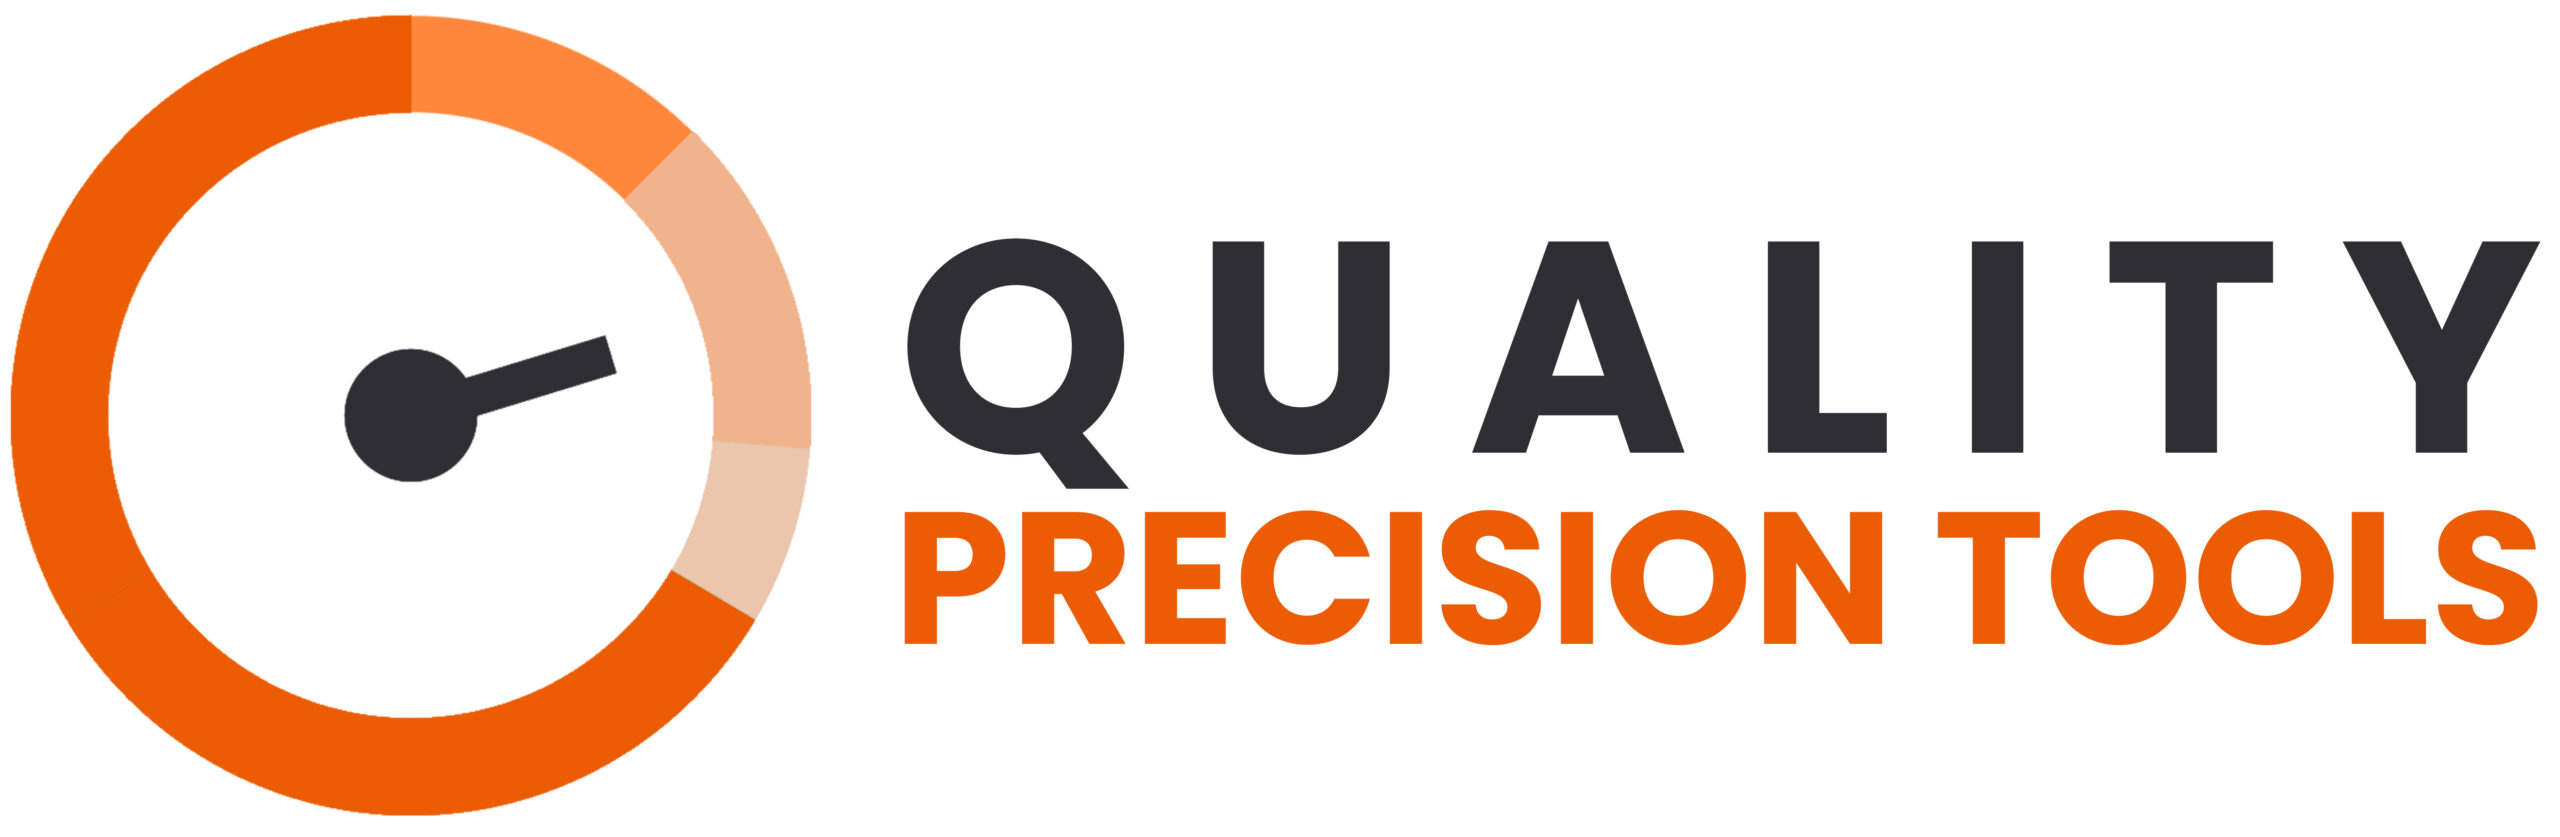 Quality Precision Tools has officially launched!